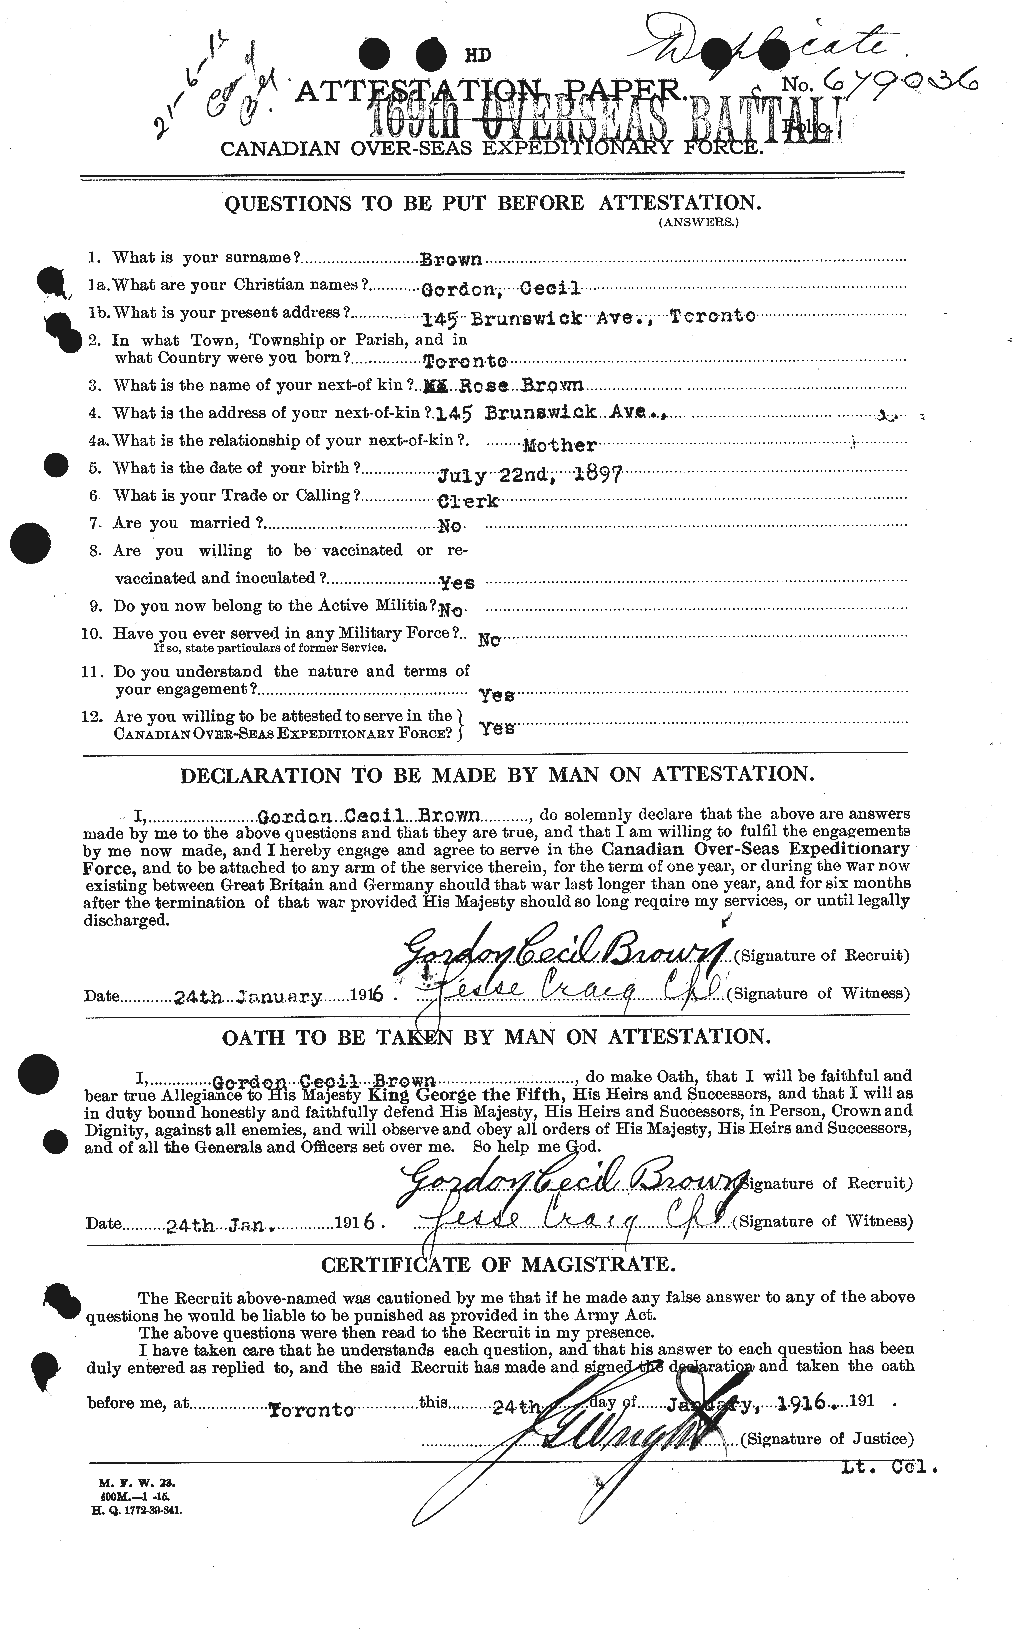 Personnel Records of the First World War - CEF 262628a